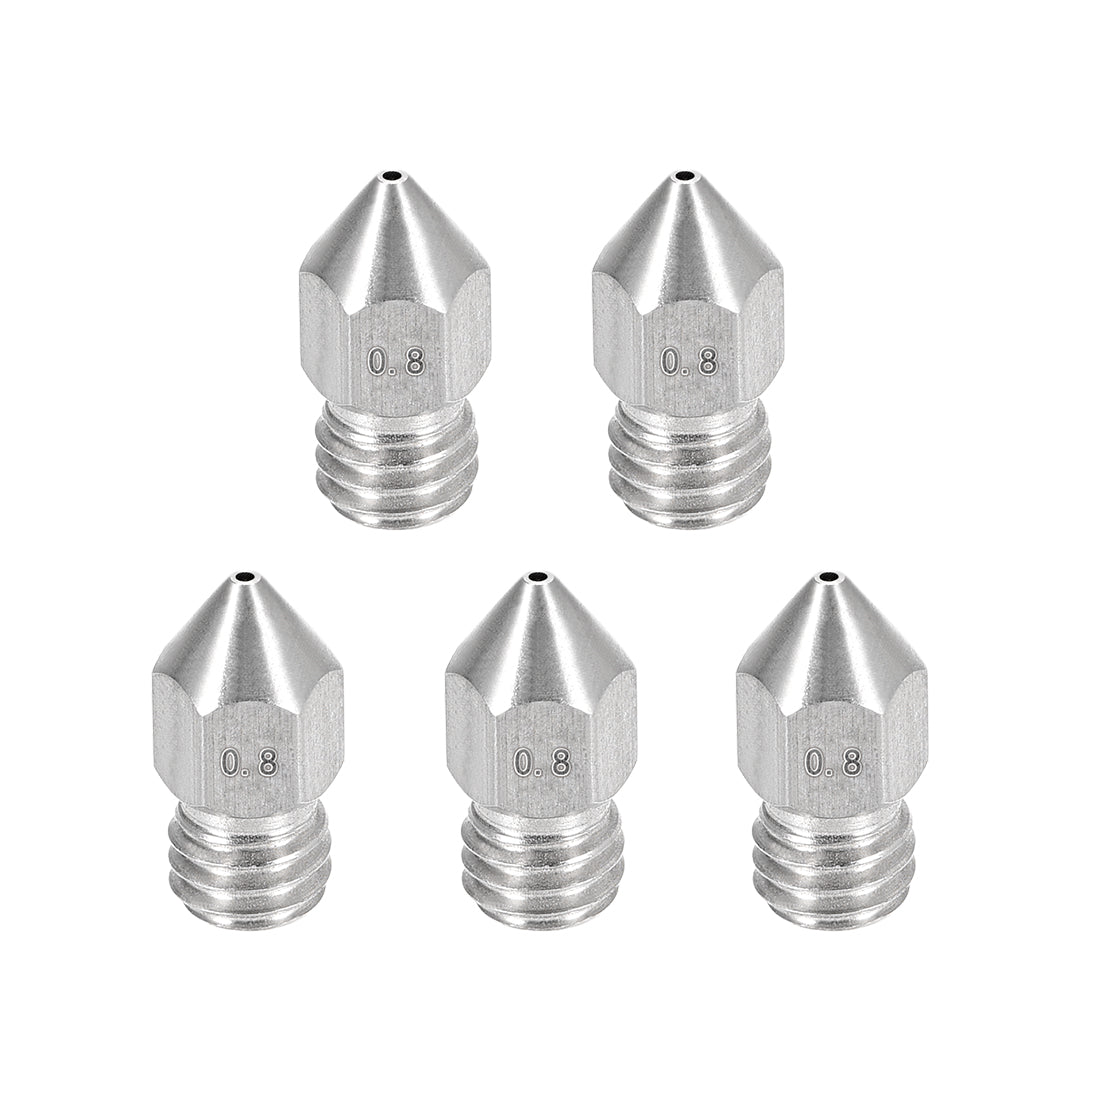 uxcell Uxcell 3D Printer Nozzle,Stainless Steel Nozzle,Extruder Print Head for Filament 3D Printer